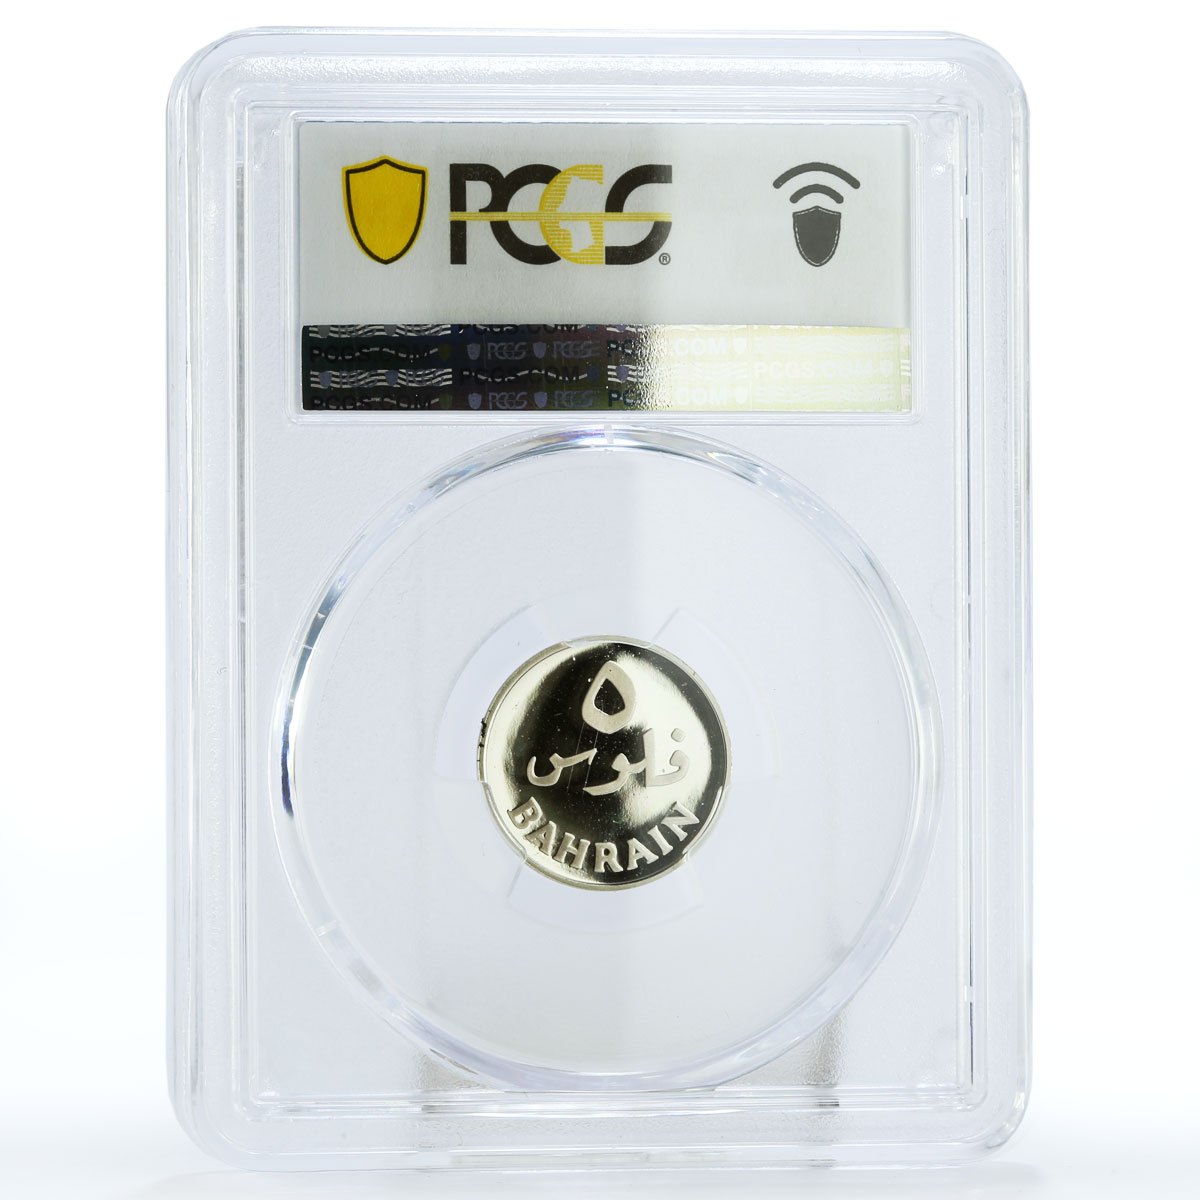 Bahrain 5 fils State Coinage Isa Palm Tree PR67 PCGS silver coin 1983